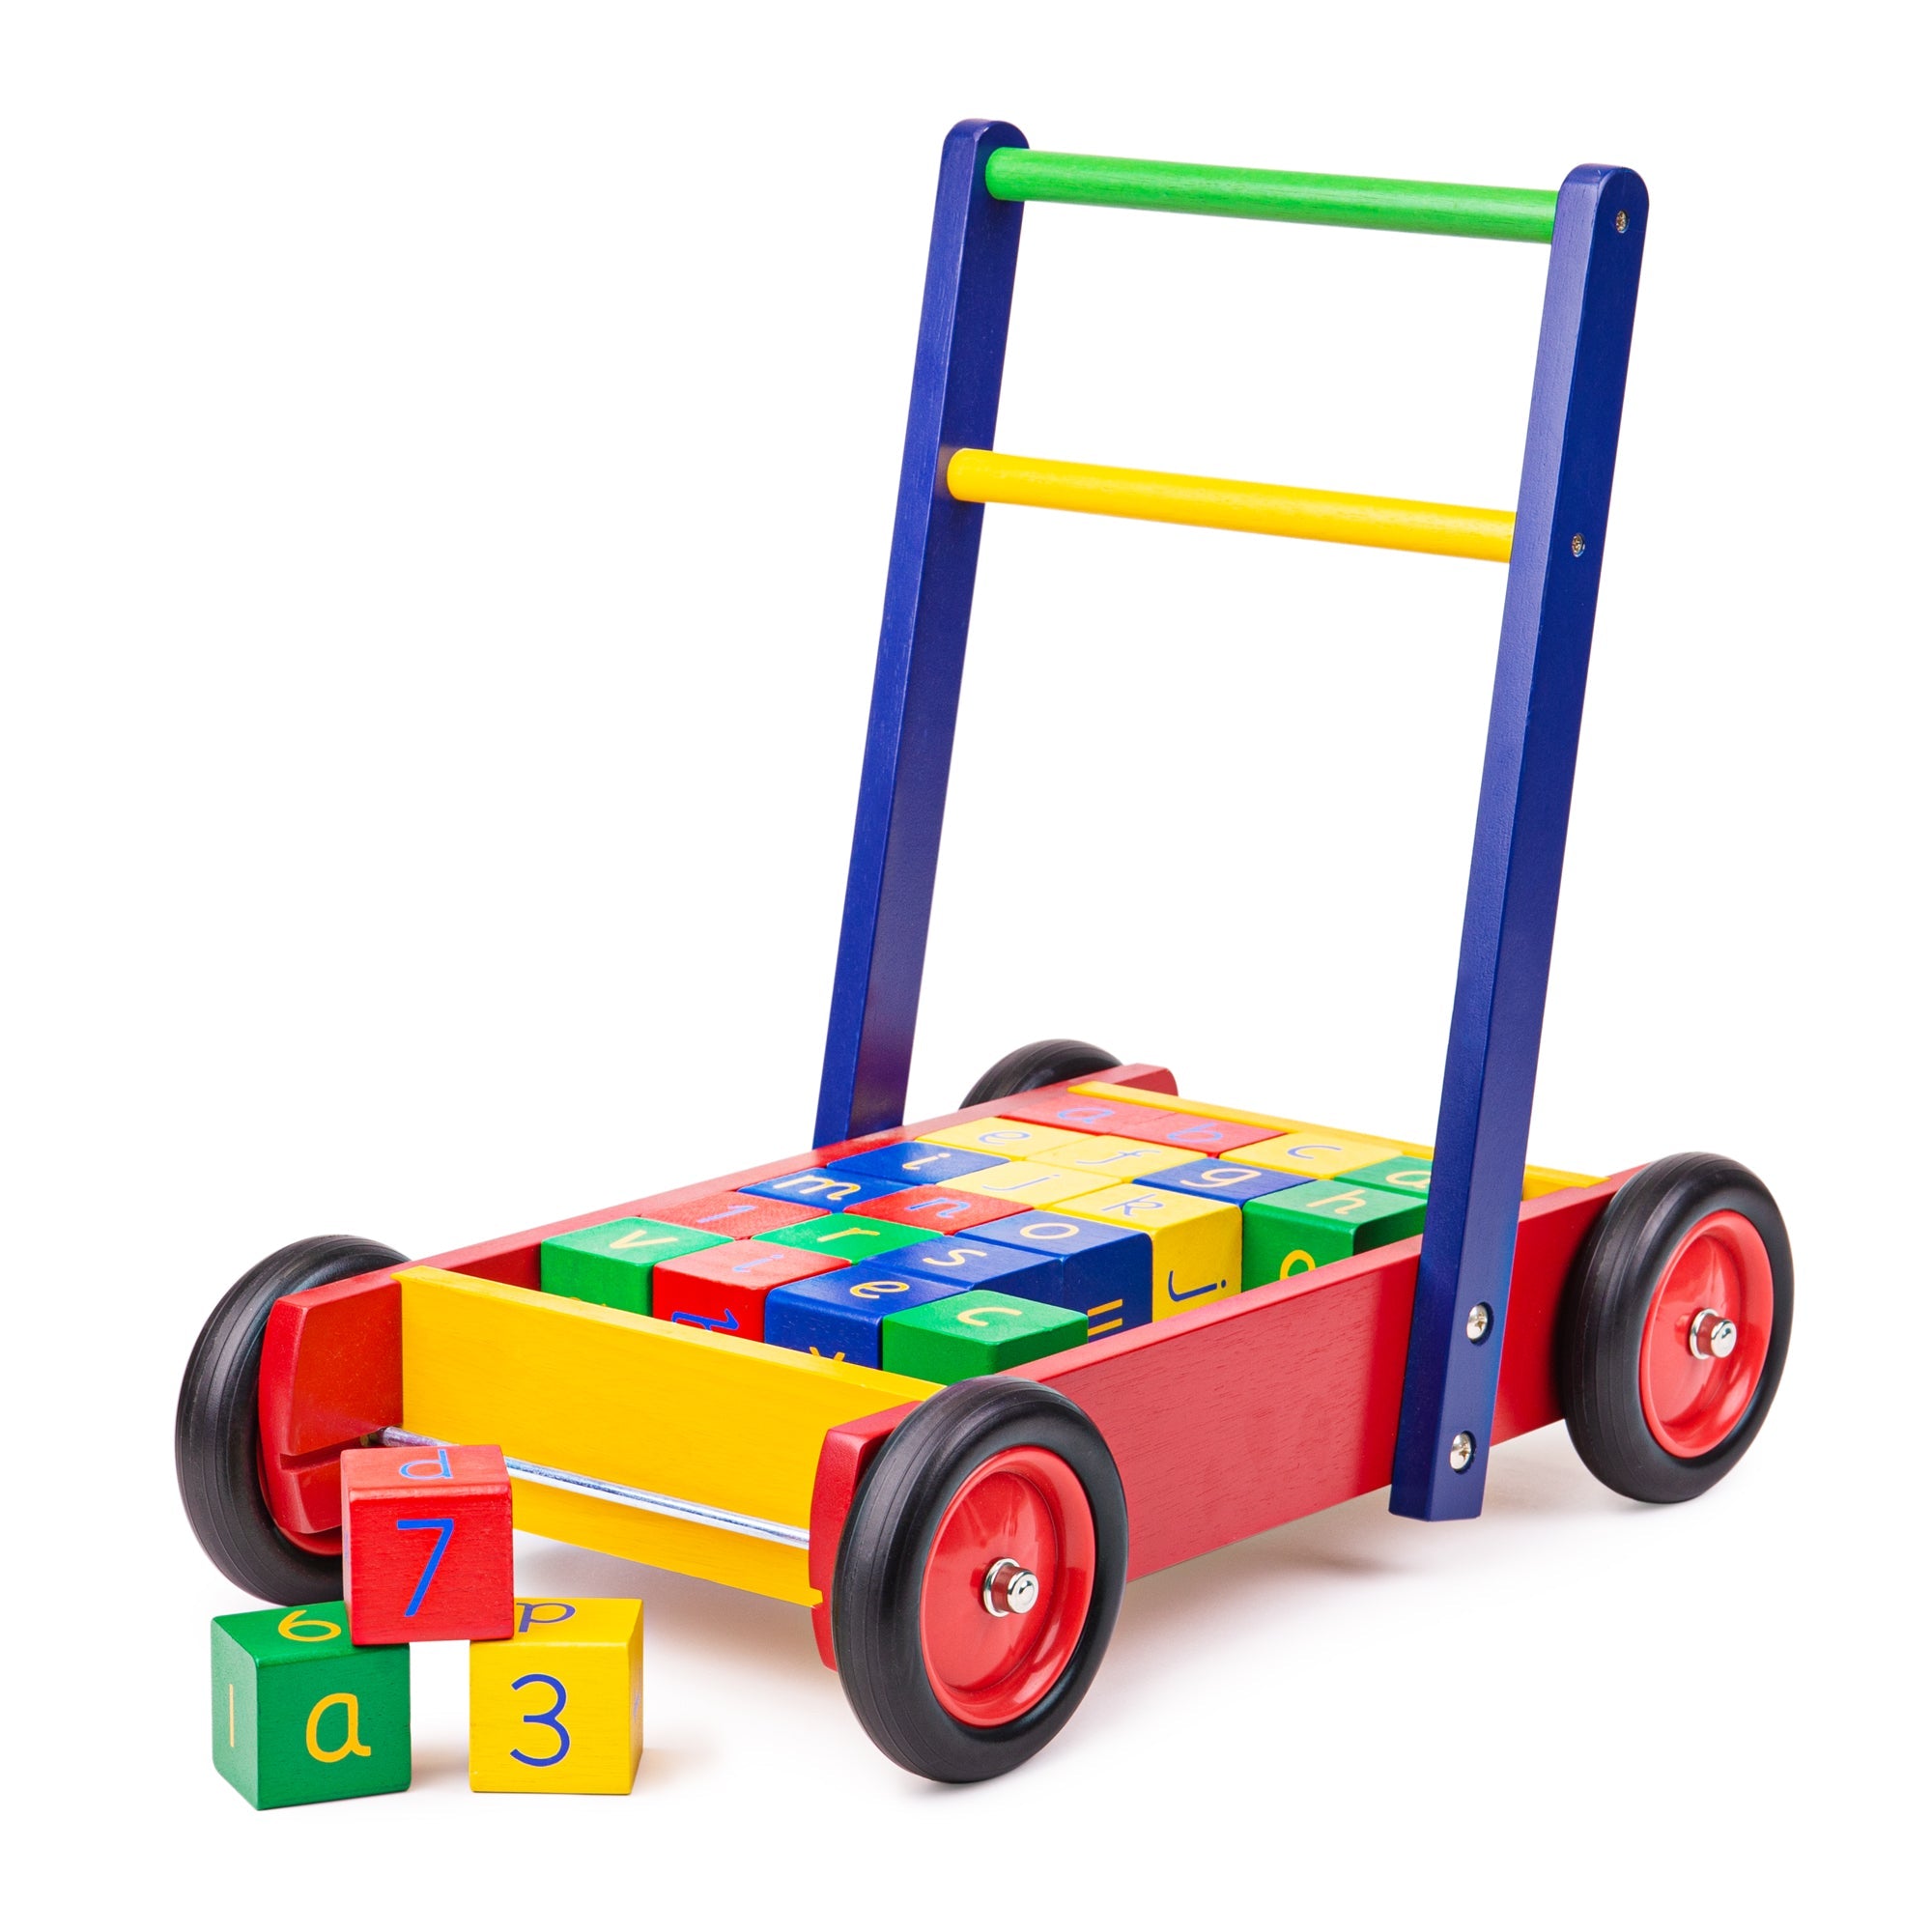 Tildo Babywalker With ABC Blocks in primary colours